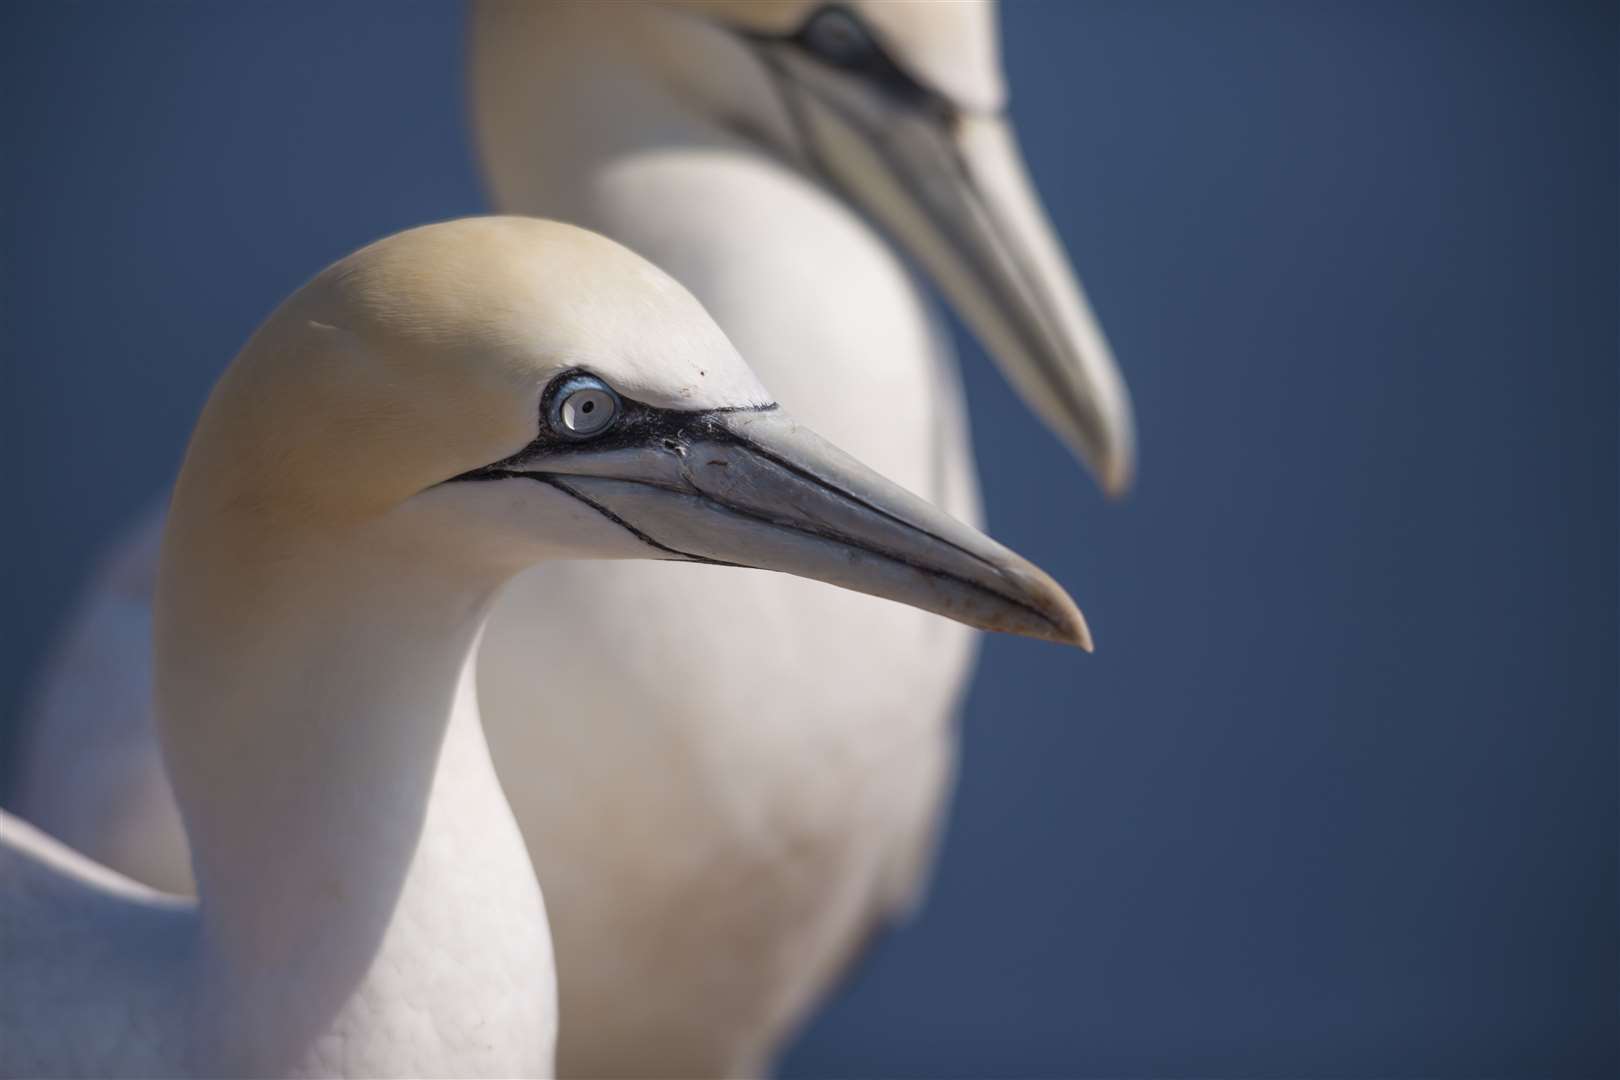 The study looked at northern gannet populations in the UK, Norway, Iceland, Canada, the Faroe Islands and Ireland.